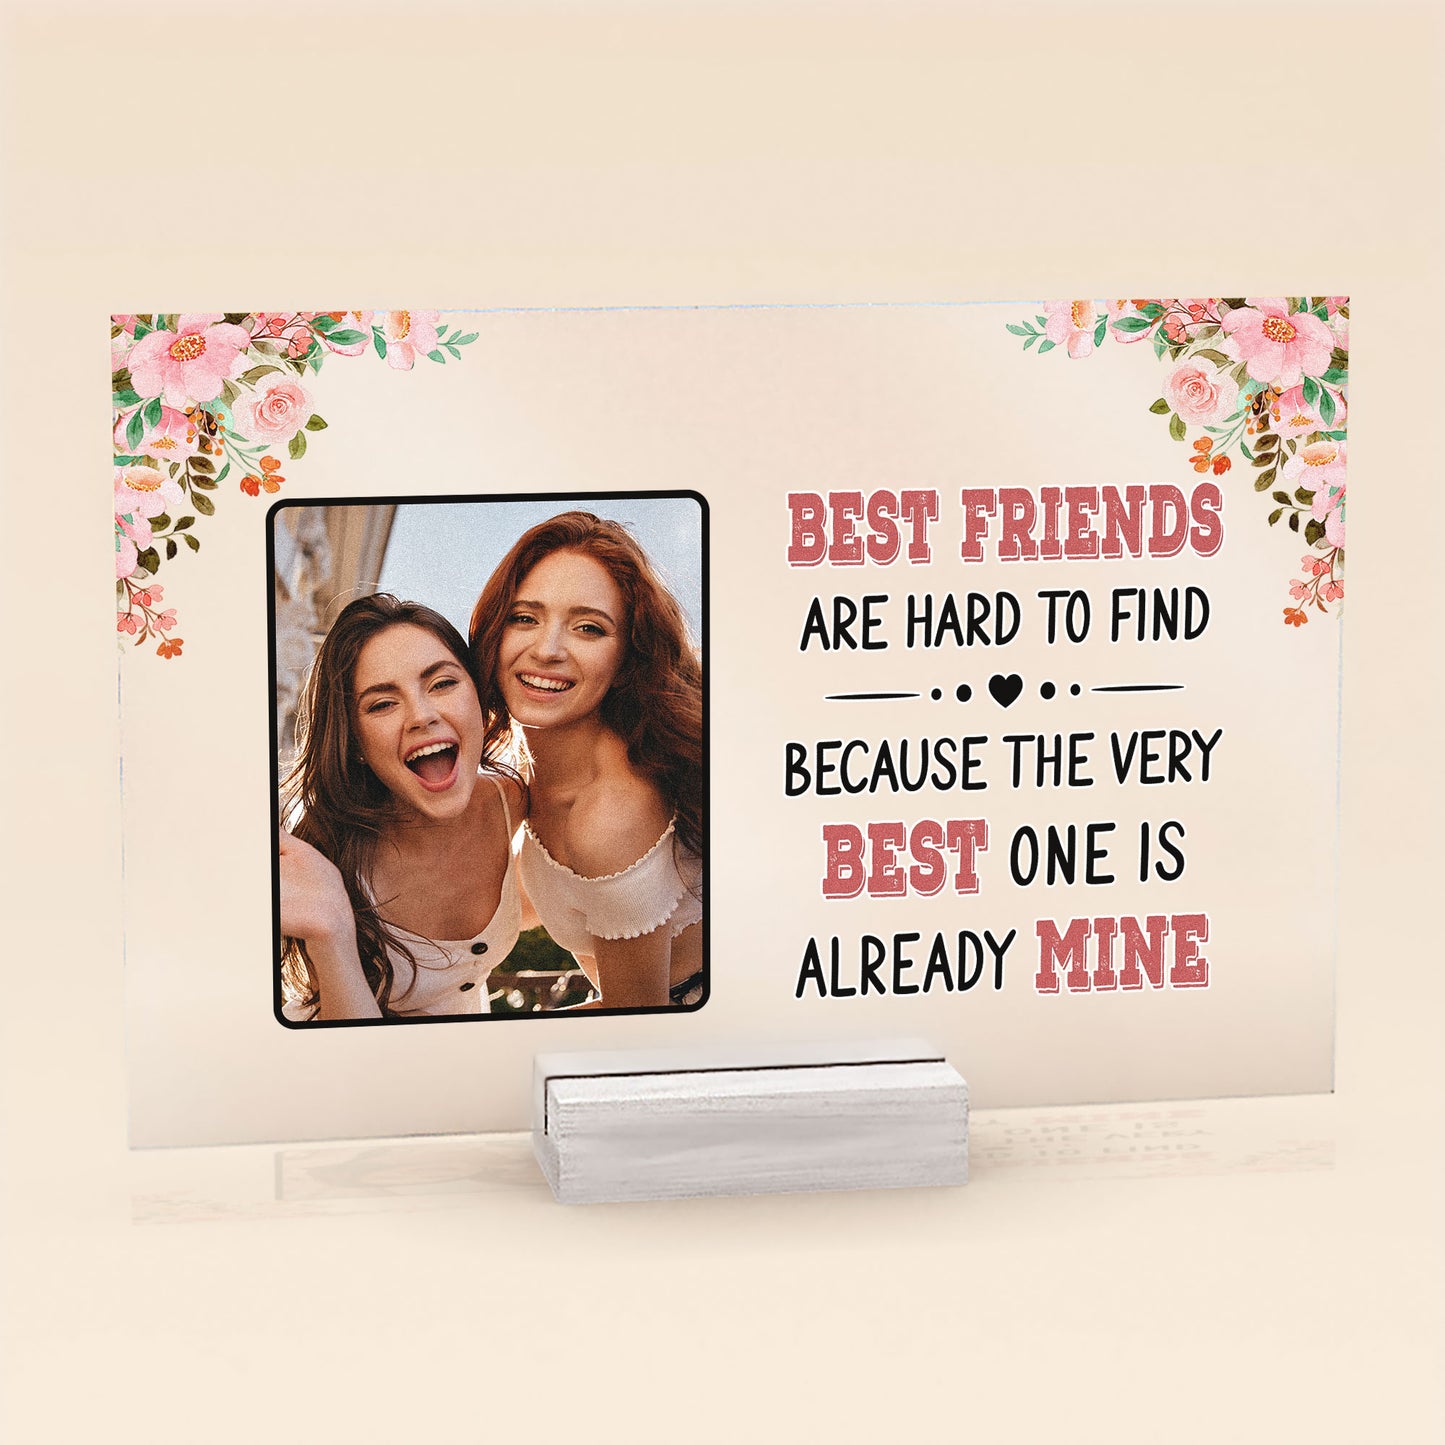 Best Friends Are Hard To Find - Personalized Acrylic Photo Plaque - Birthday, Friendship Day Gift For Besties, BFF, Friends